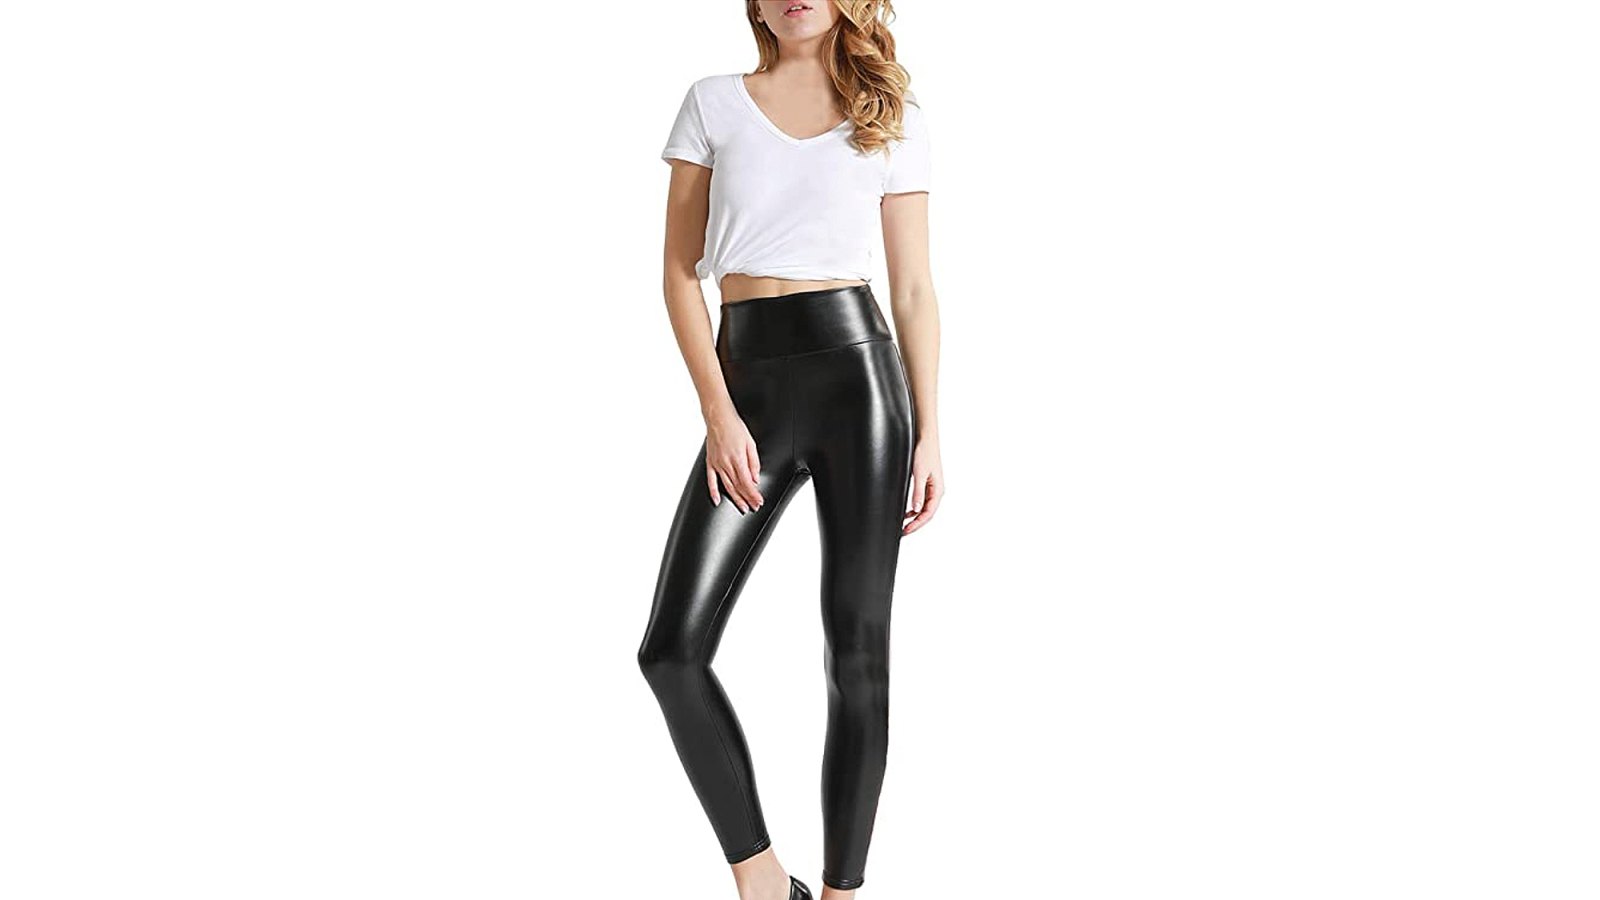 Tagoo Women's Stretchy Faux Leather Leggings Pants